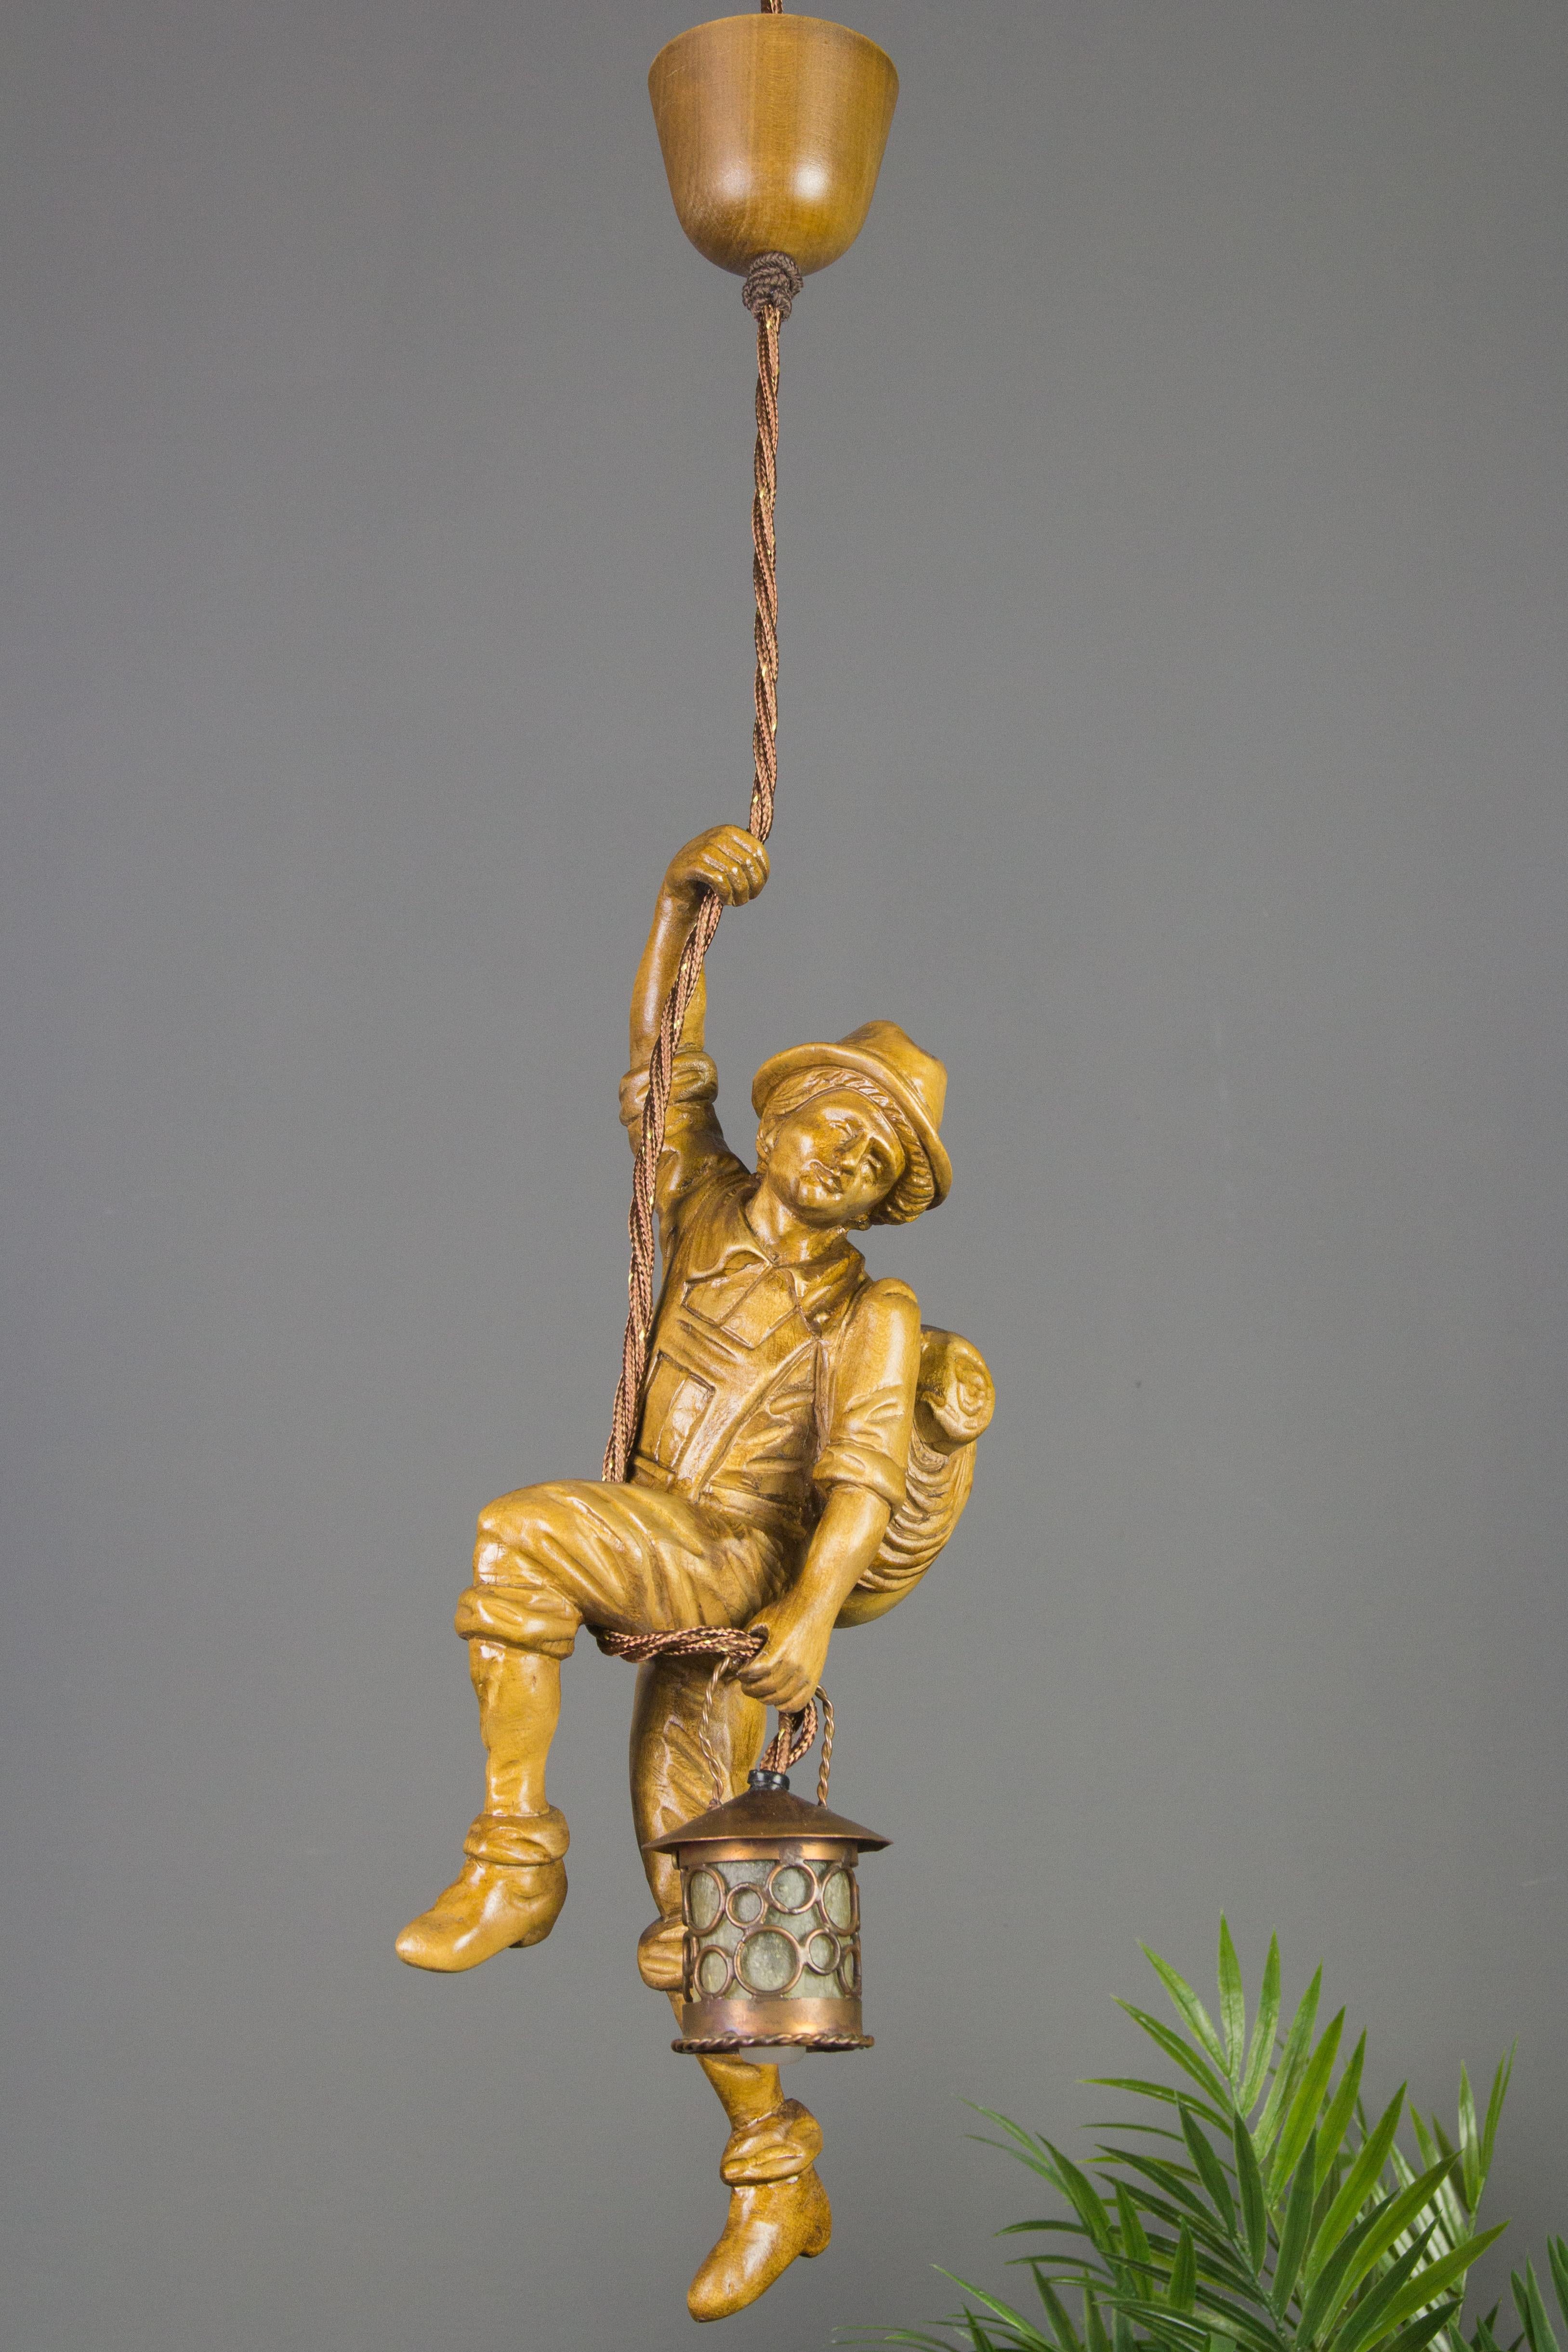 Wonderful German Black Forest figural pendant lamp features a hand-carved figure of a mountain climber. The detailed carved wooden mountaineer with a backpack is holding onto a rope and holding a copper lantern in one hand.
The height of the pendant